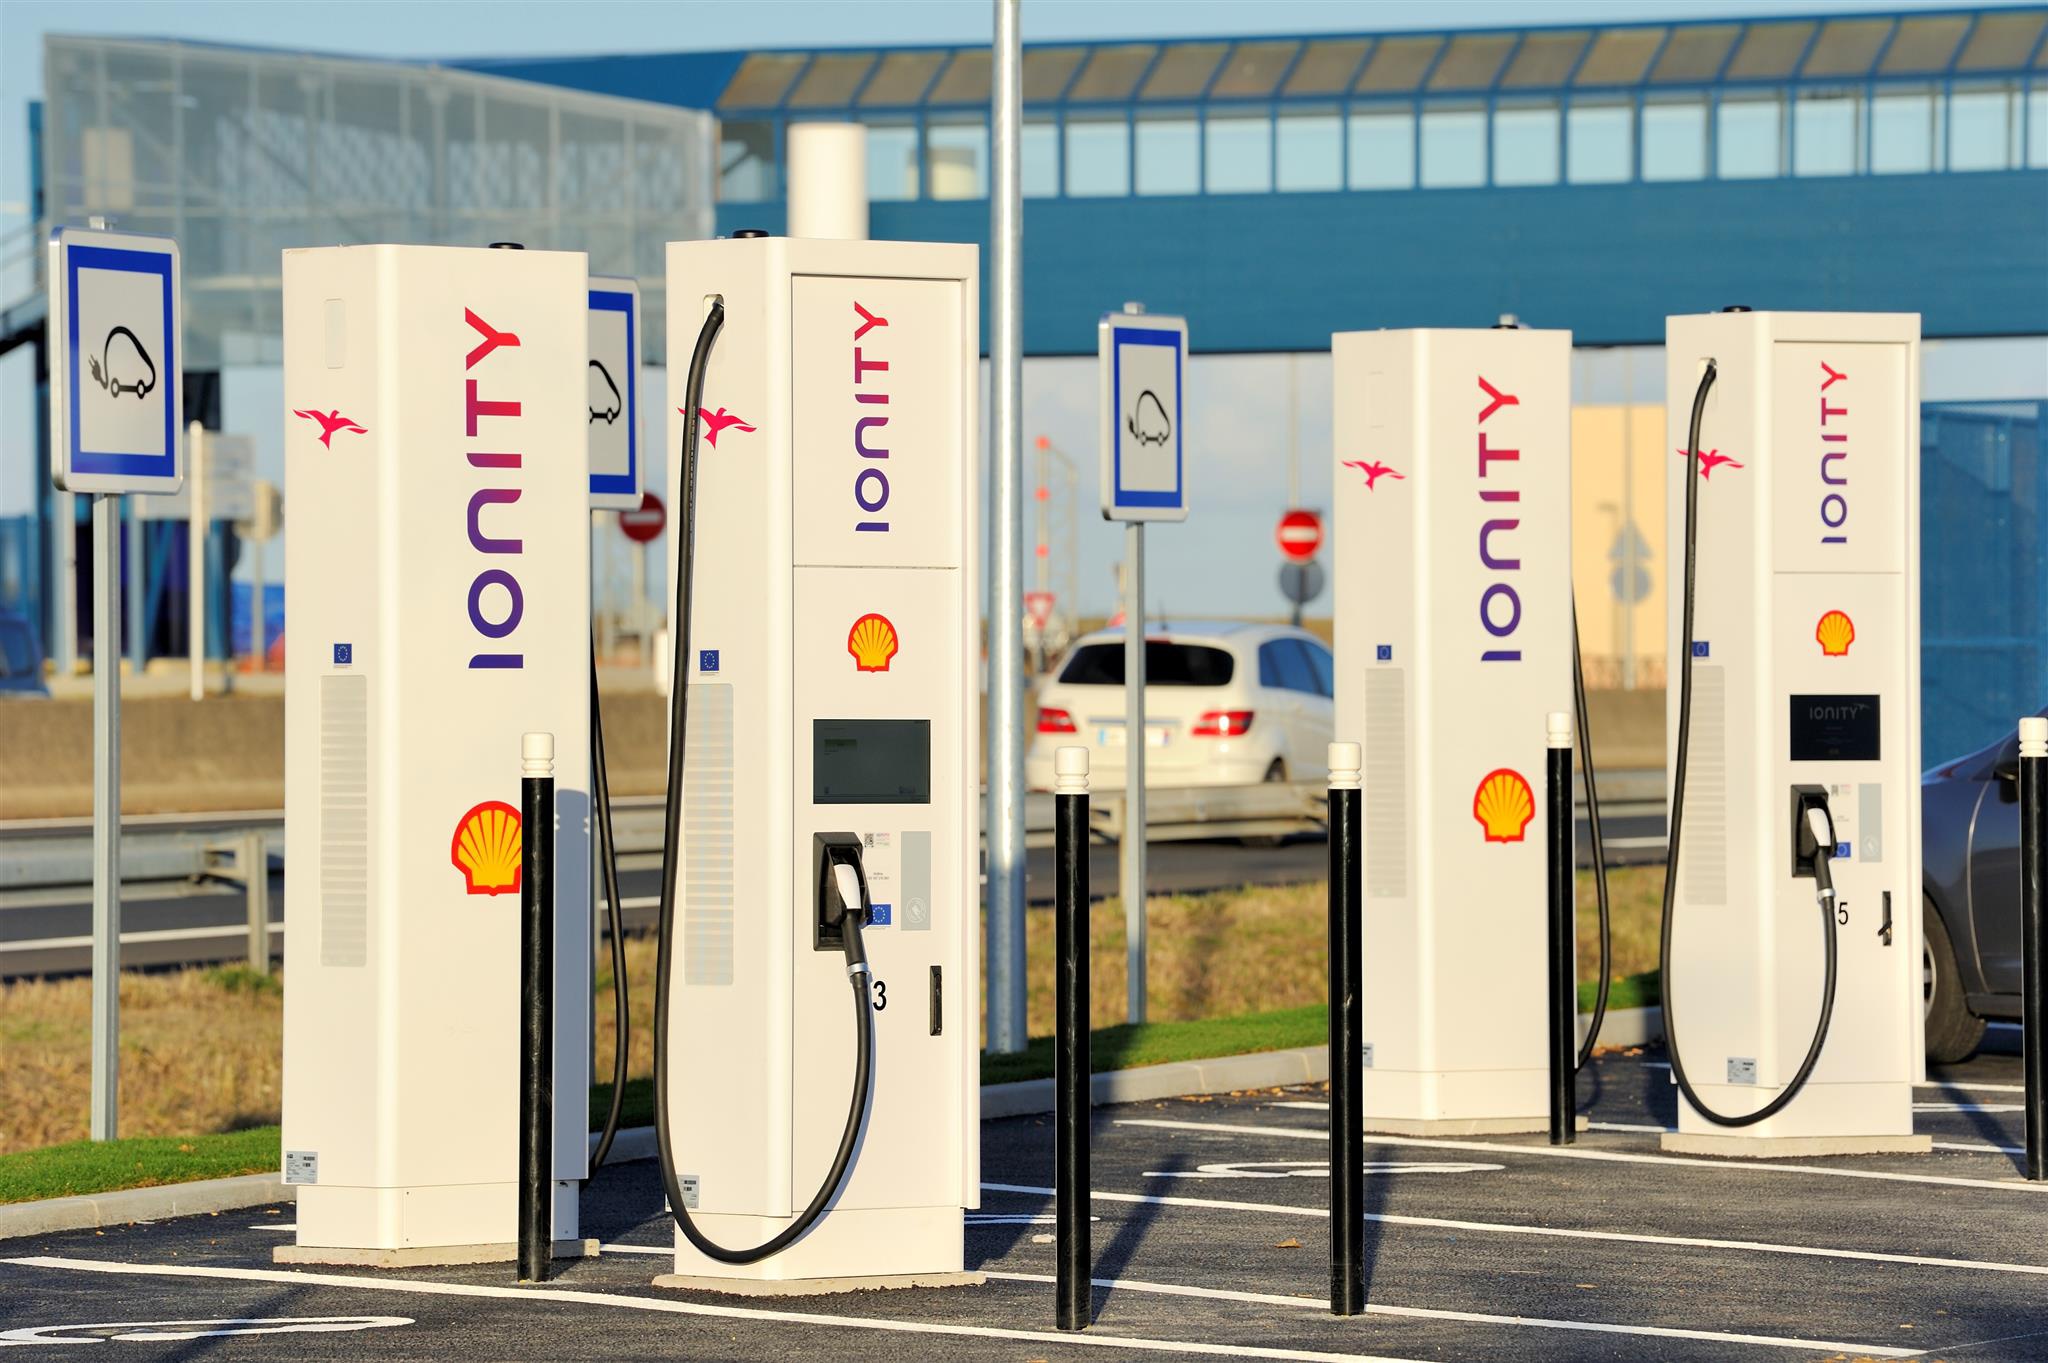 IONITY chooses SPIE for the deployment of its pan-European network of electric vehicle charging stations